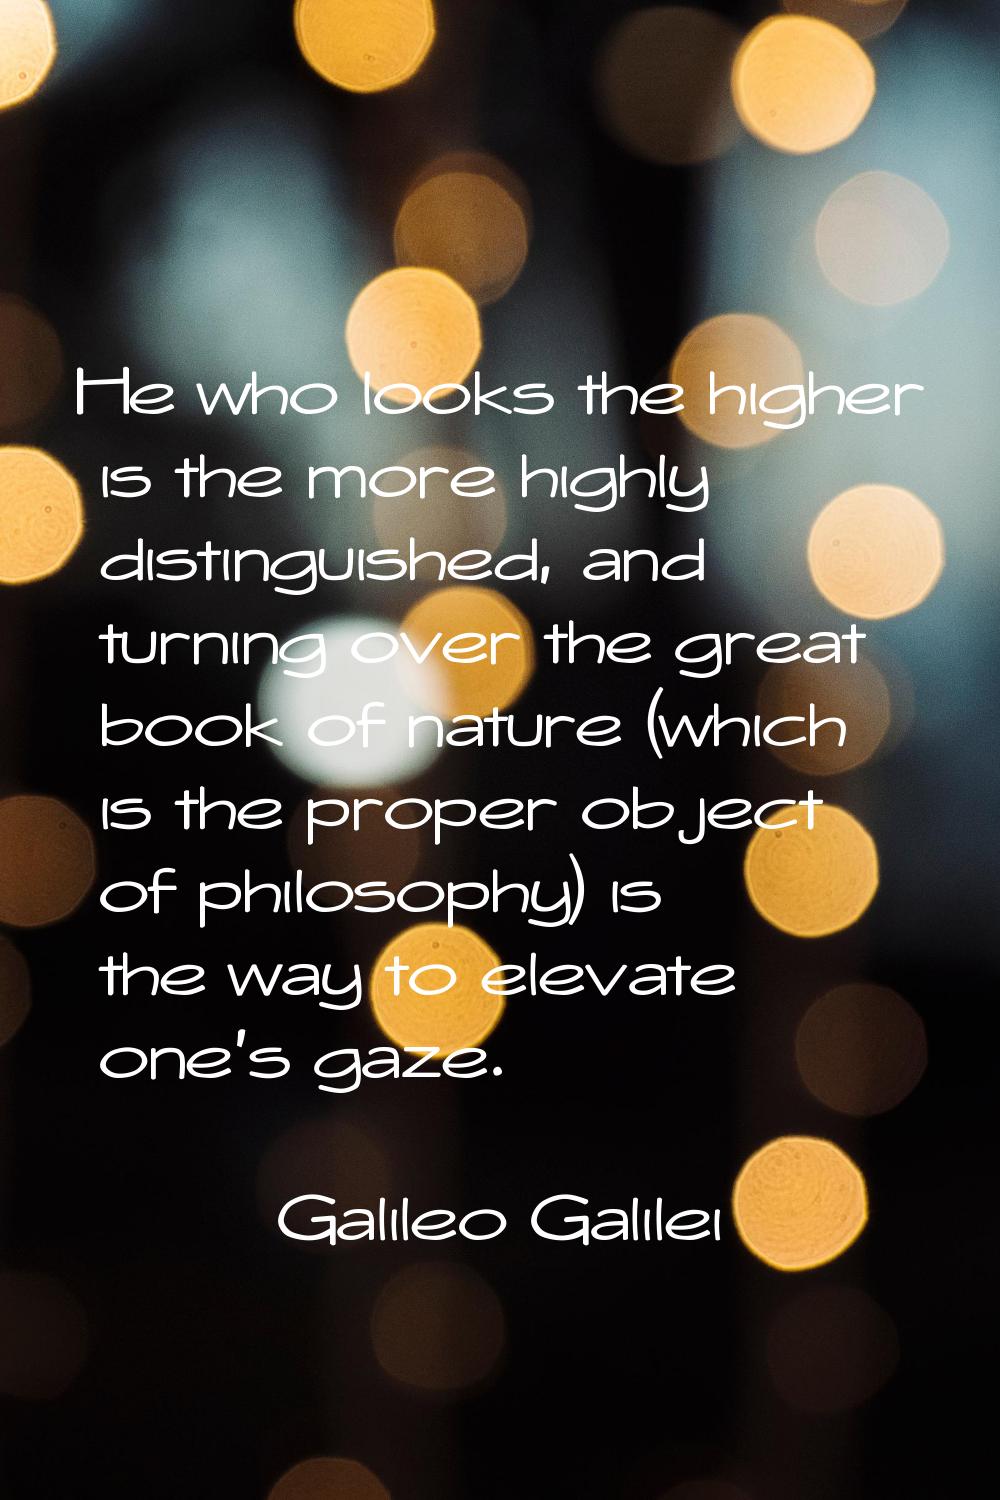 He who looks the higher is the more highly distinguished, and turning over the great book of nature